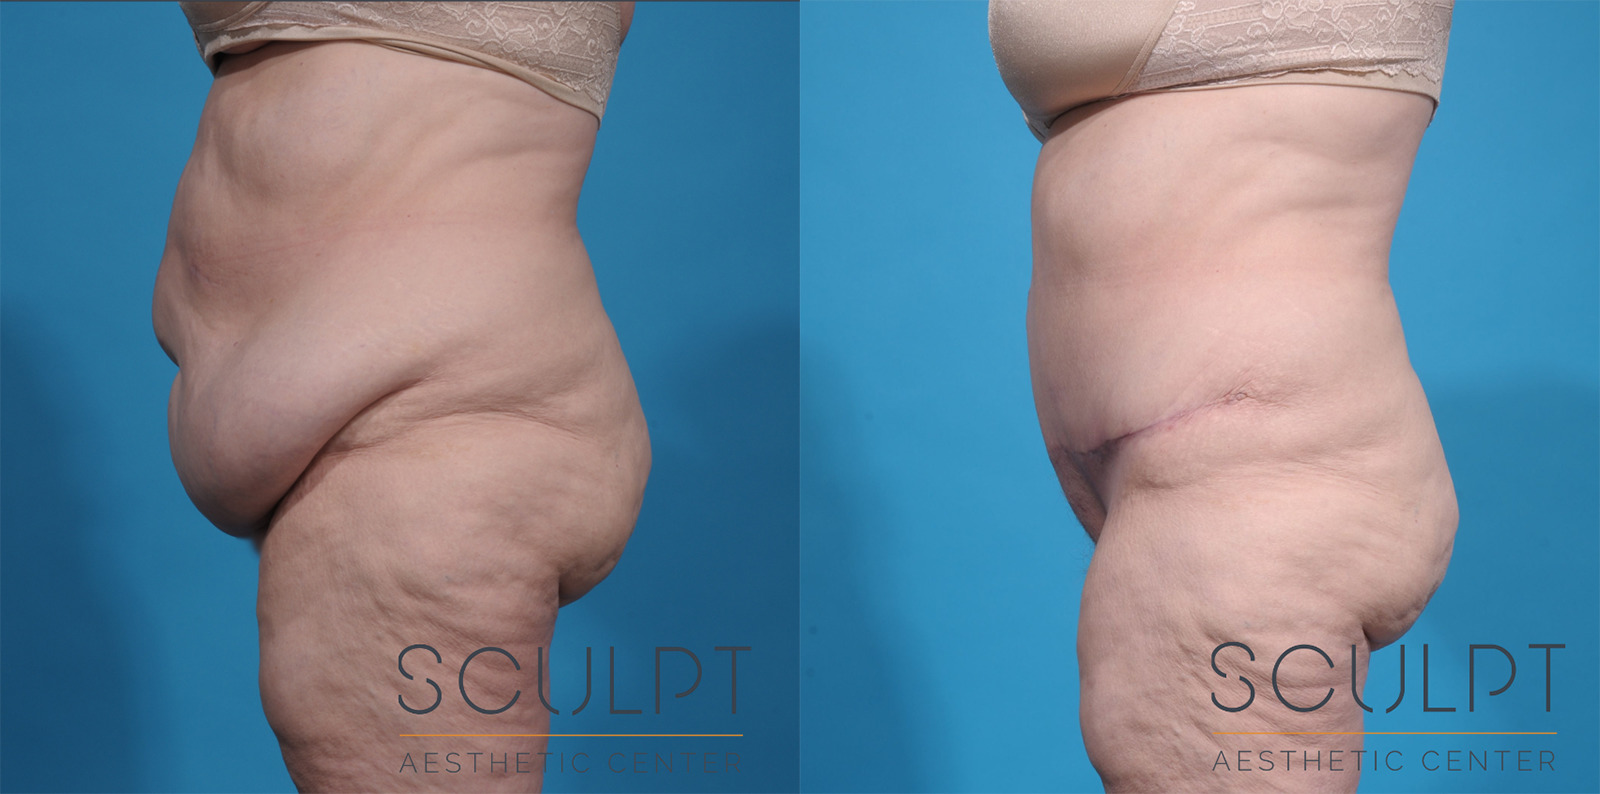 After Weight Loss Before and After Photo by Sculpt Aesthetic Center in Frisco, TX